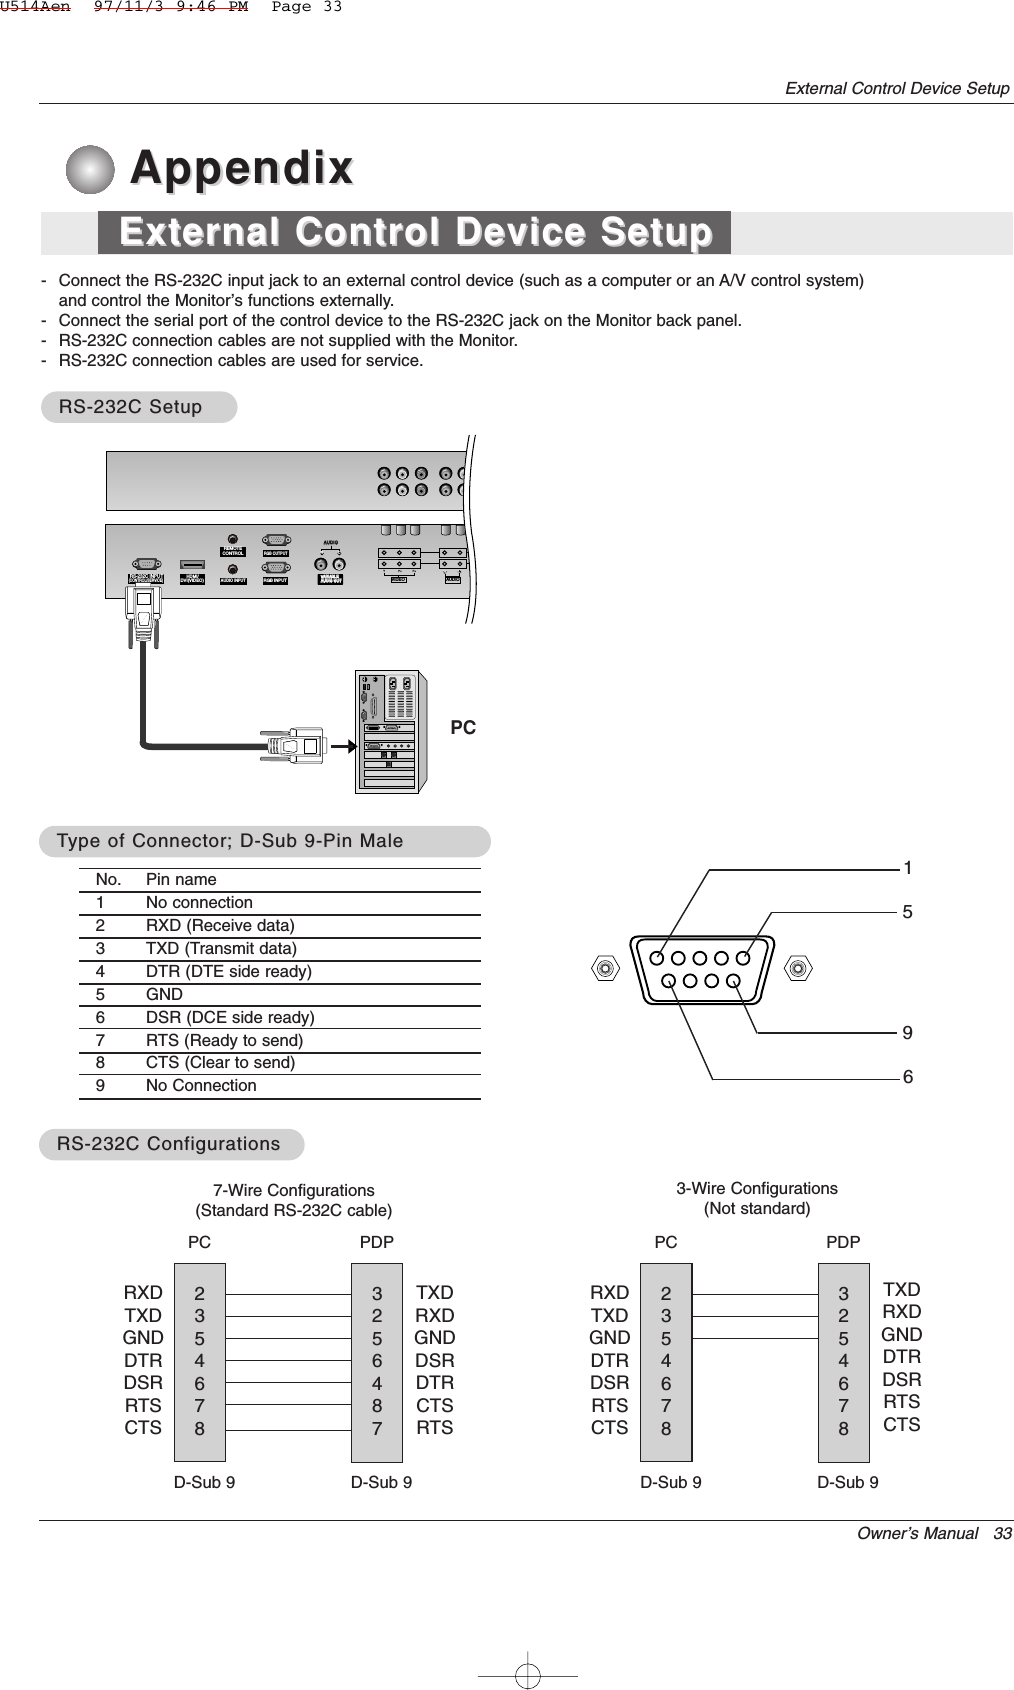 Owner’s Manual   33External Control Device SetupRS-232C INPUT(CONTROL/SERVICE)AUDIO AUDIO LR REMOTECONTROLAUDIO INPUTRGB INPUTVARIABLE ARIABLE AUDIO OUTAUDIO OUT     HDMI/DVI(VIDEO)RGB OUTPUTAUDIOVIDEORLNo. Pin name1 No connection2 RXD (Receive data)3 TXD (Transmit data)4 DTR (DTE side ready)5 GND6 DSR (DCE side ready)7 RTS (Ready to send)8 CTS (Clear to send)9 No Connection15692354678RXDTXDGNDDTRDSRRTSCTSTXDRXDGNDDSRDTRCTSRTSPC7-Wire Configurations(Standard RS-232C cable)D-Sub 93256487PDPD-Sub 92354678RXDTXDGNDDTRDSRRTSCTSTXDRXDGNDDTRDSRRTSCTSPC3-Wire Configurations(Not standard)D-Sub 93254678PDPD-Sub 9- Connect the RS-232C input jack to an external control device (such as a computer or an A/V control system)and control the Monitor’s functions externally.- Connect the serial port of the control device to the RS-232C jack on the Monitor back panel.- RS-232C connection cables are not supplied with the Monitor.- RS-232C connection cables are used for service.TType of Connector; D-Sub 9-Pin Maleype of Connector; D-Sub 9-Pin MaleRS-232C ConfigurationsRS-232C ConfigurationsRS-232C SetupRS-232C SetupPCAppendixAppendixExternal Control Device SetupExternal Control Device SetupU514Aen  97/11/3 9:46 PM  Page 33